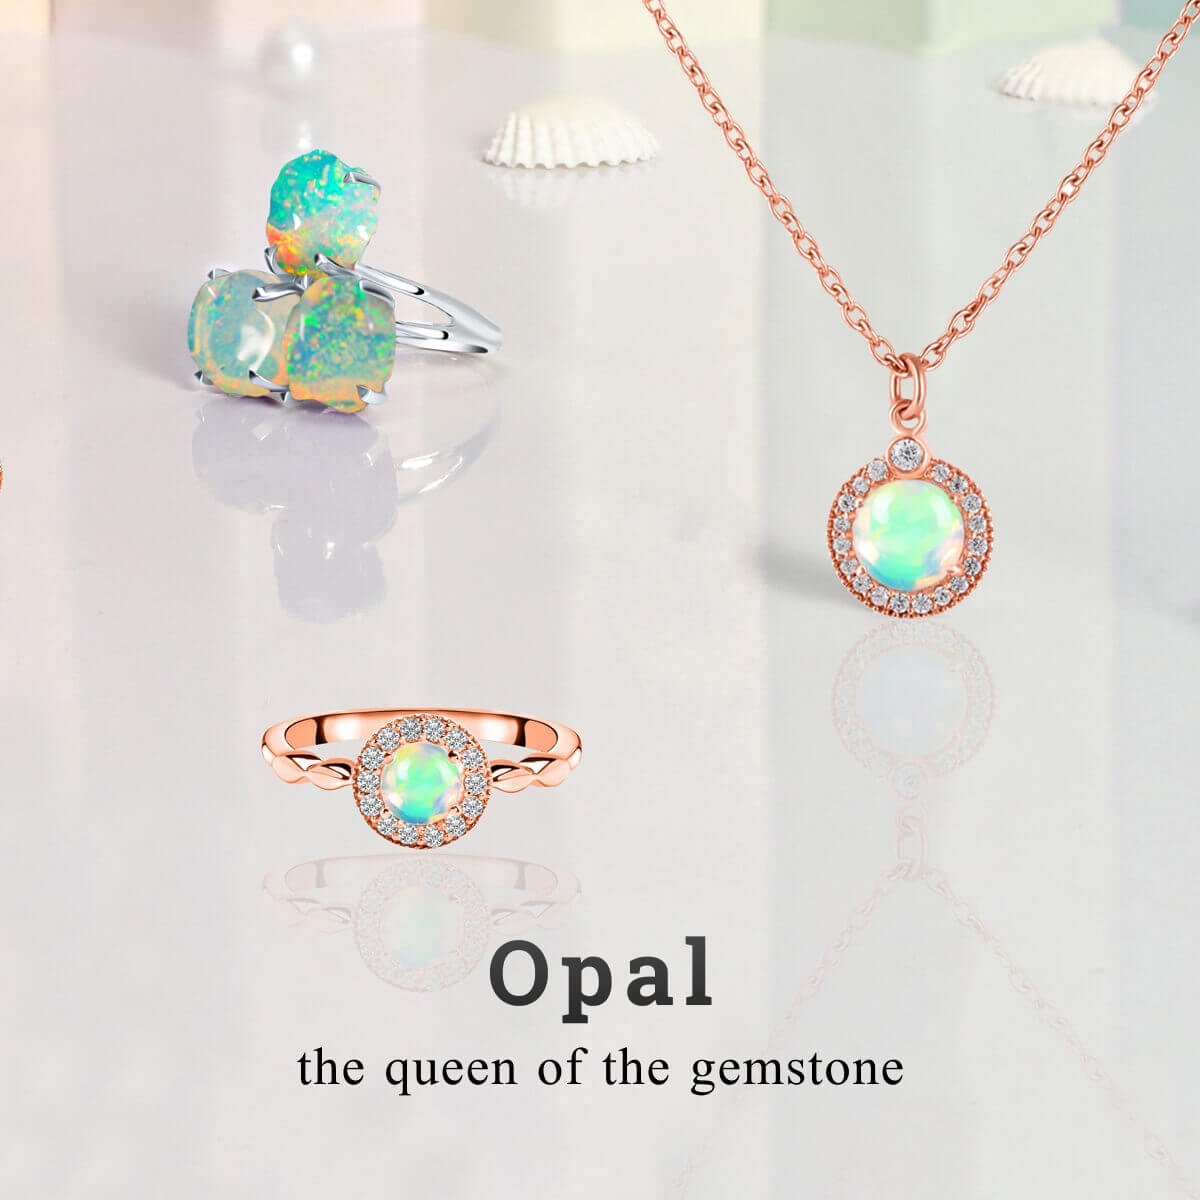 Opal - 'the queen of the gemstone